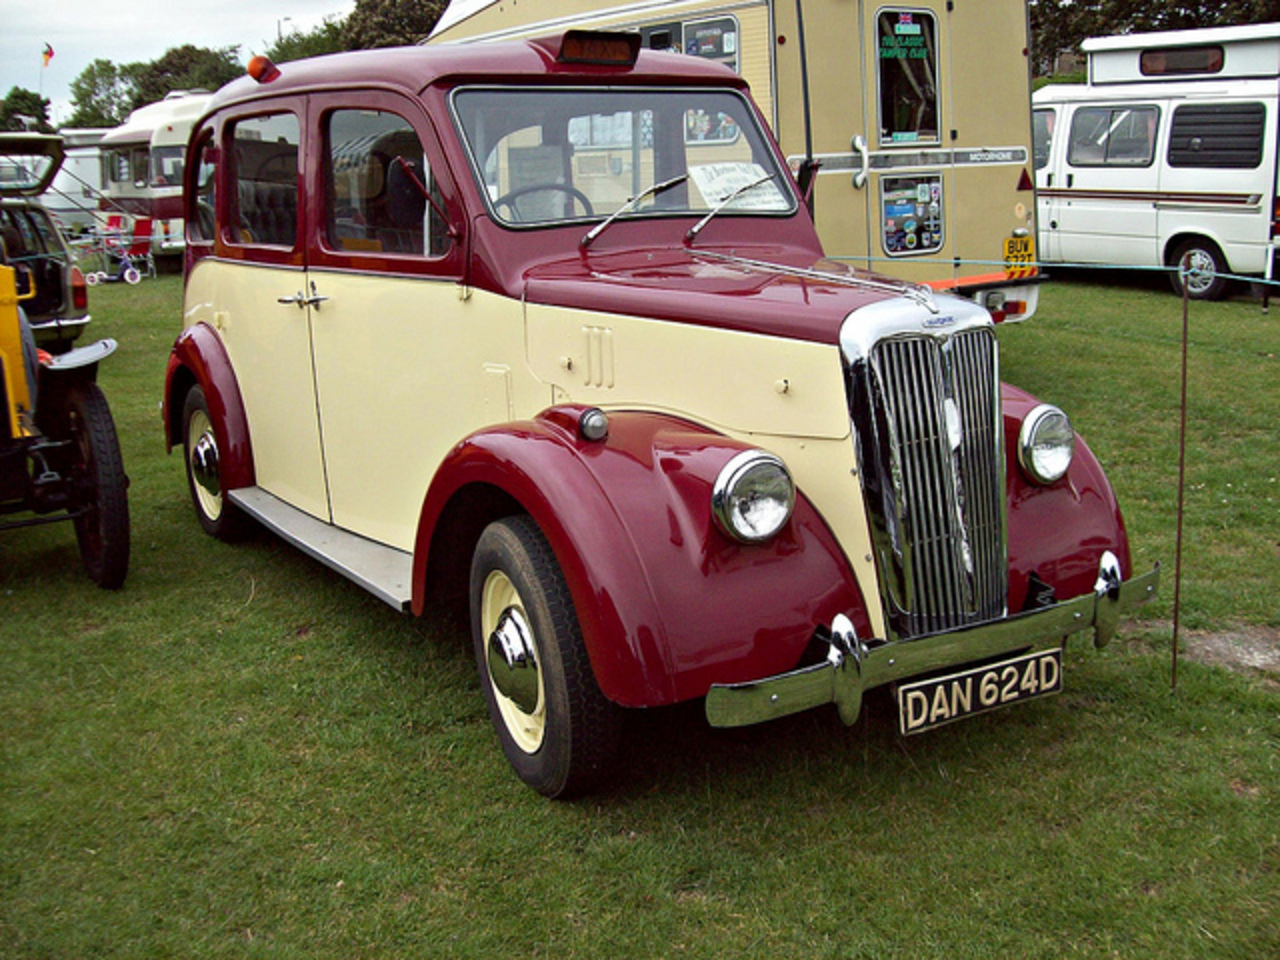 Beardmore Mk 7 Taxi Photo Gallery: Photo #02 out of 8, Image Size ...